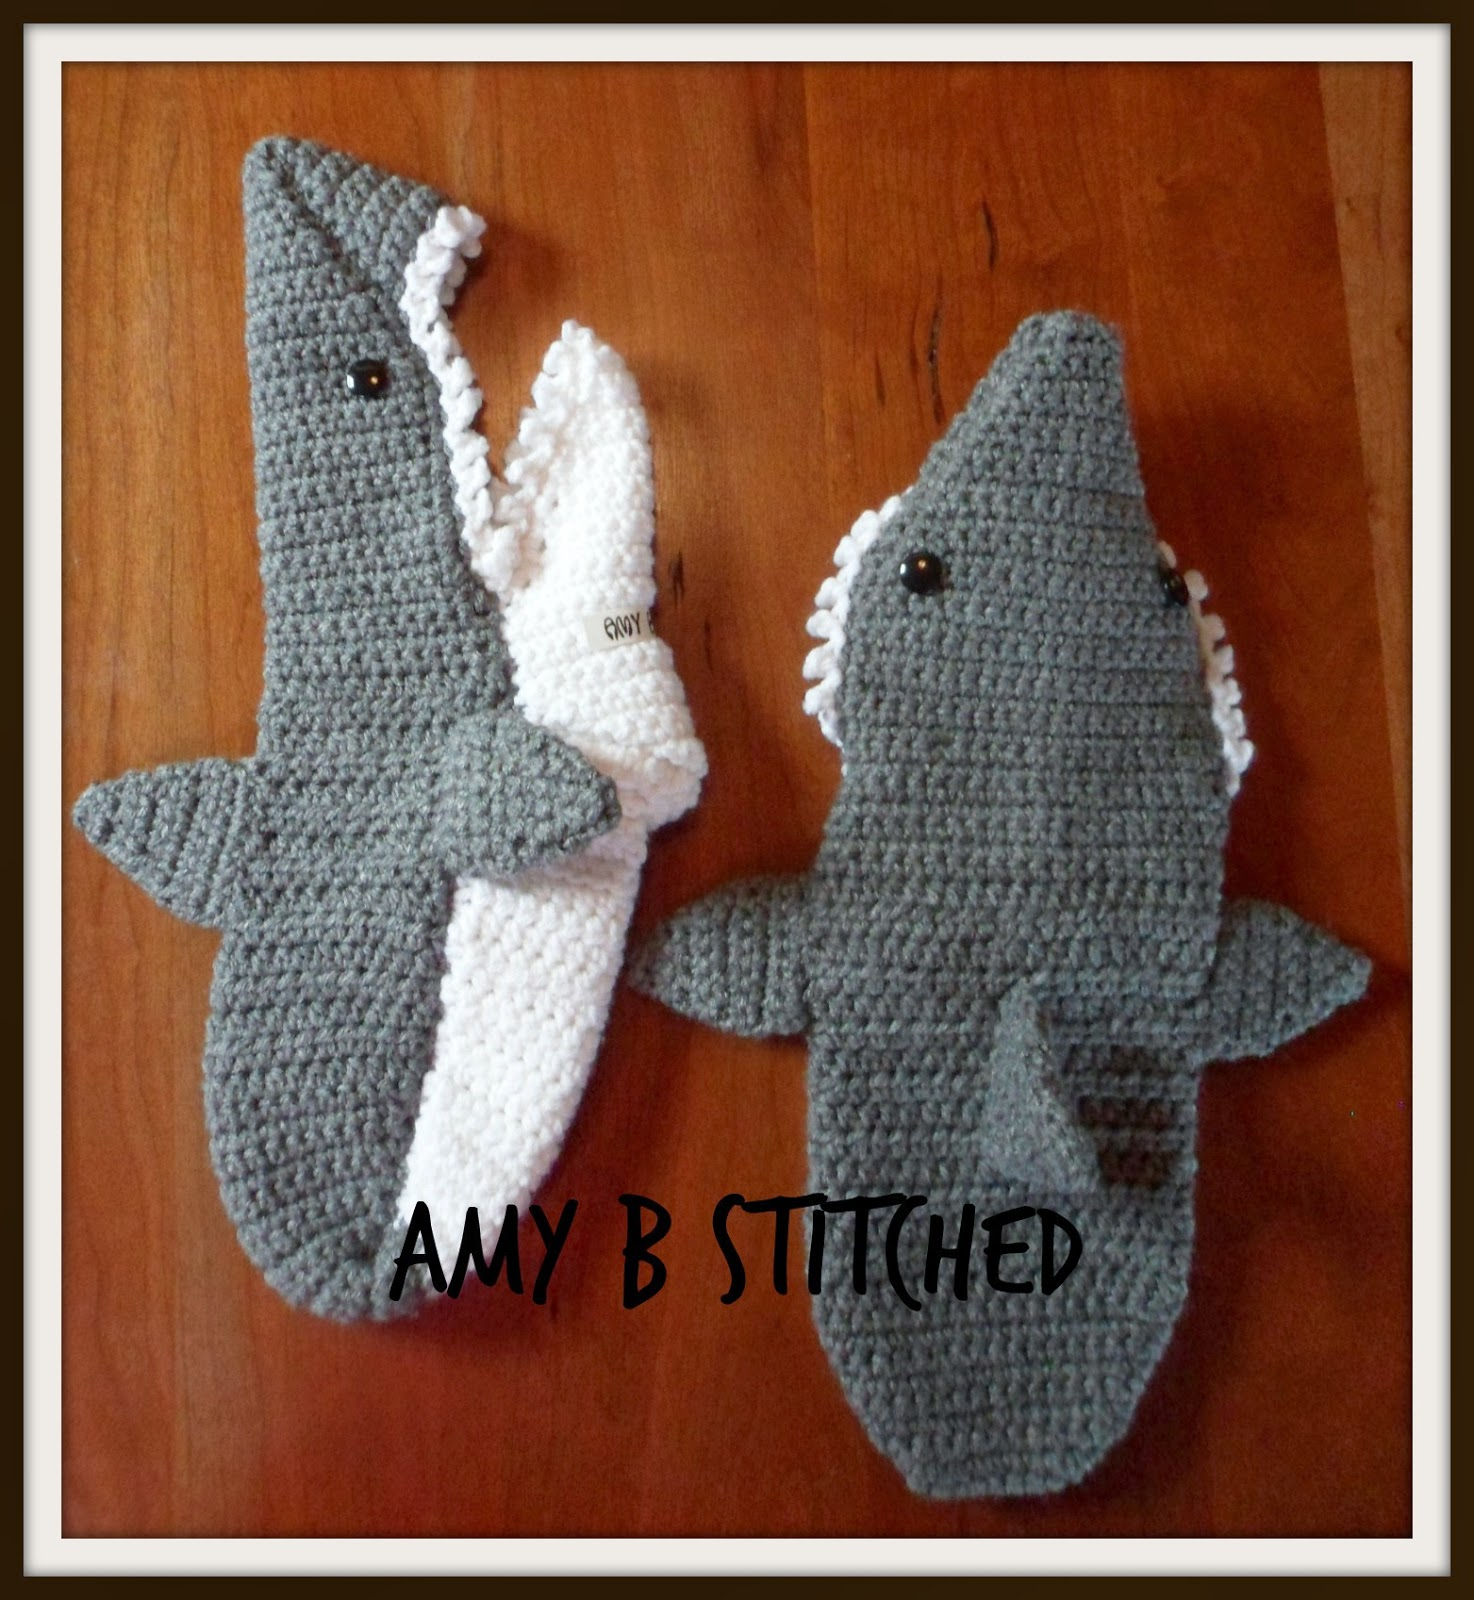 Free Crochet Shark Hat Pattern A Stitch At A Time For Amy B Stitched Crocheted Shark Slippers